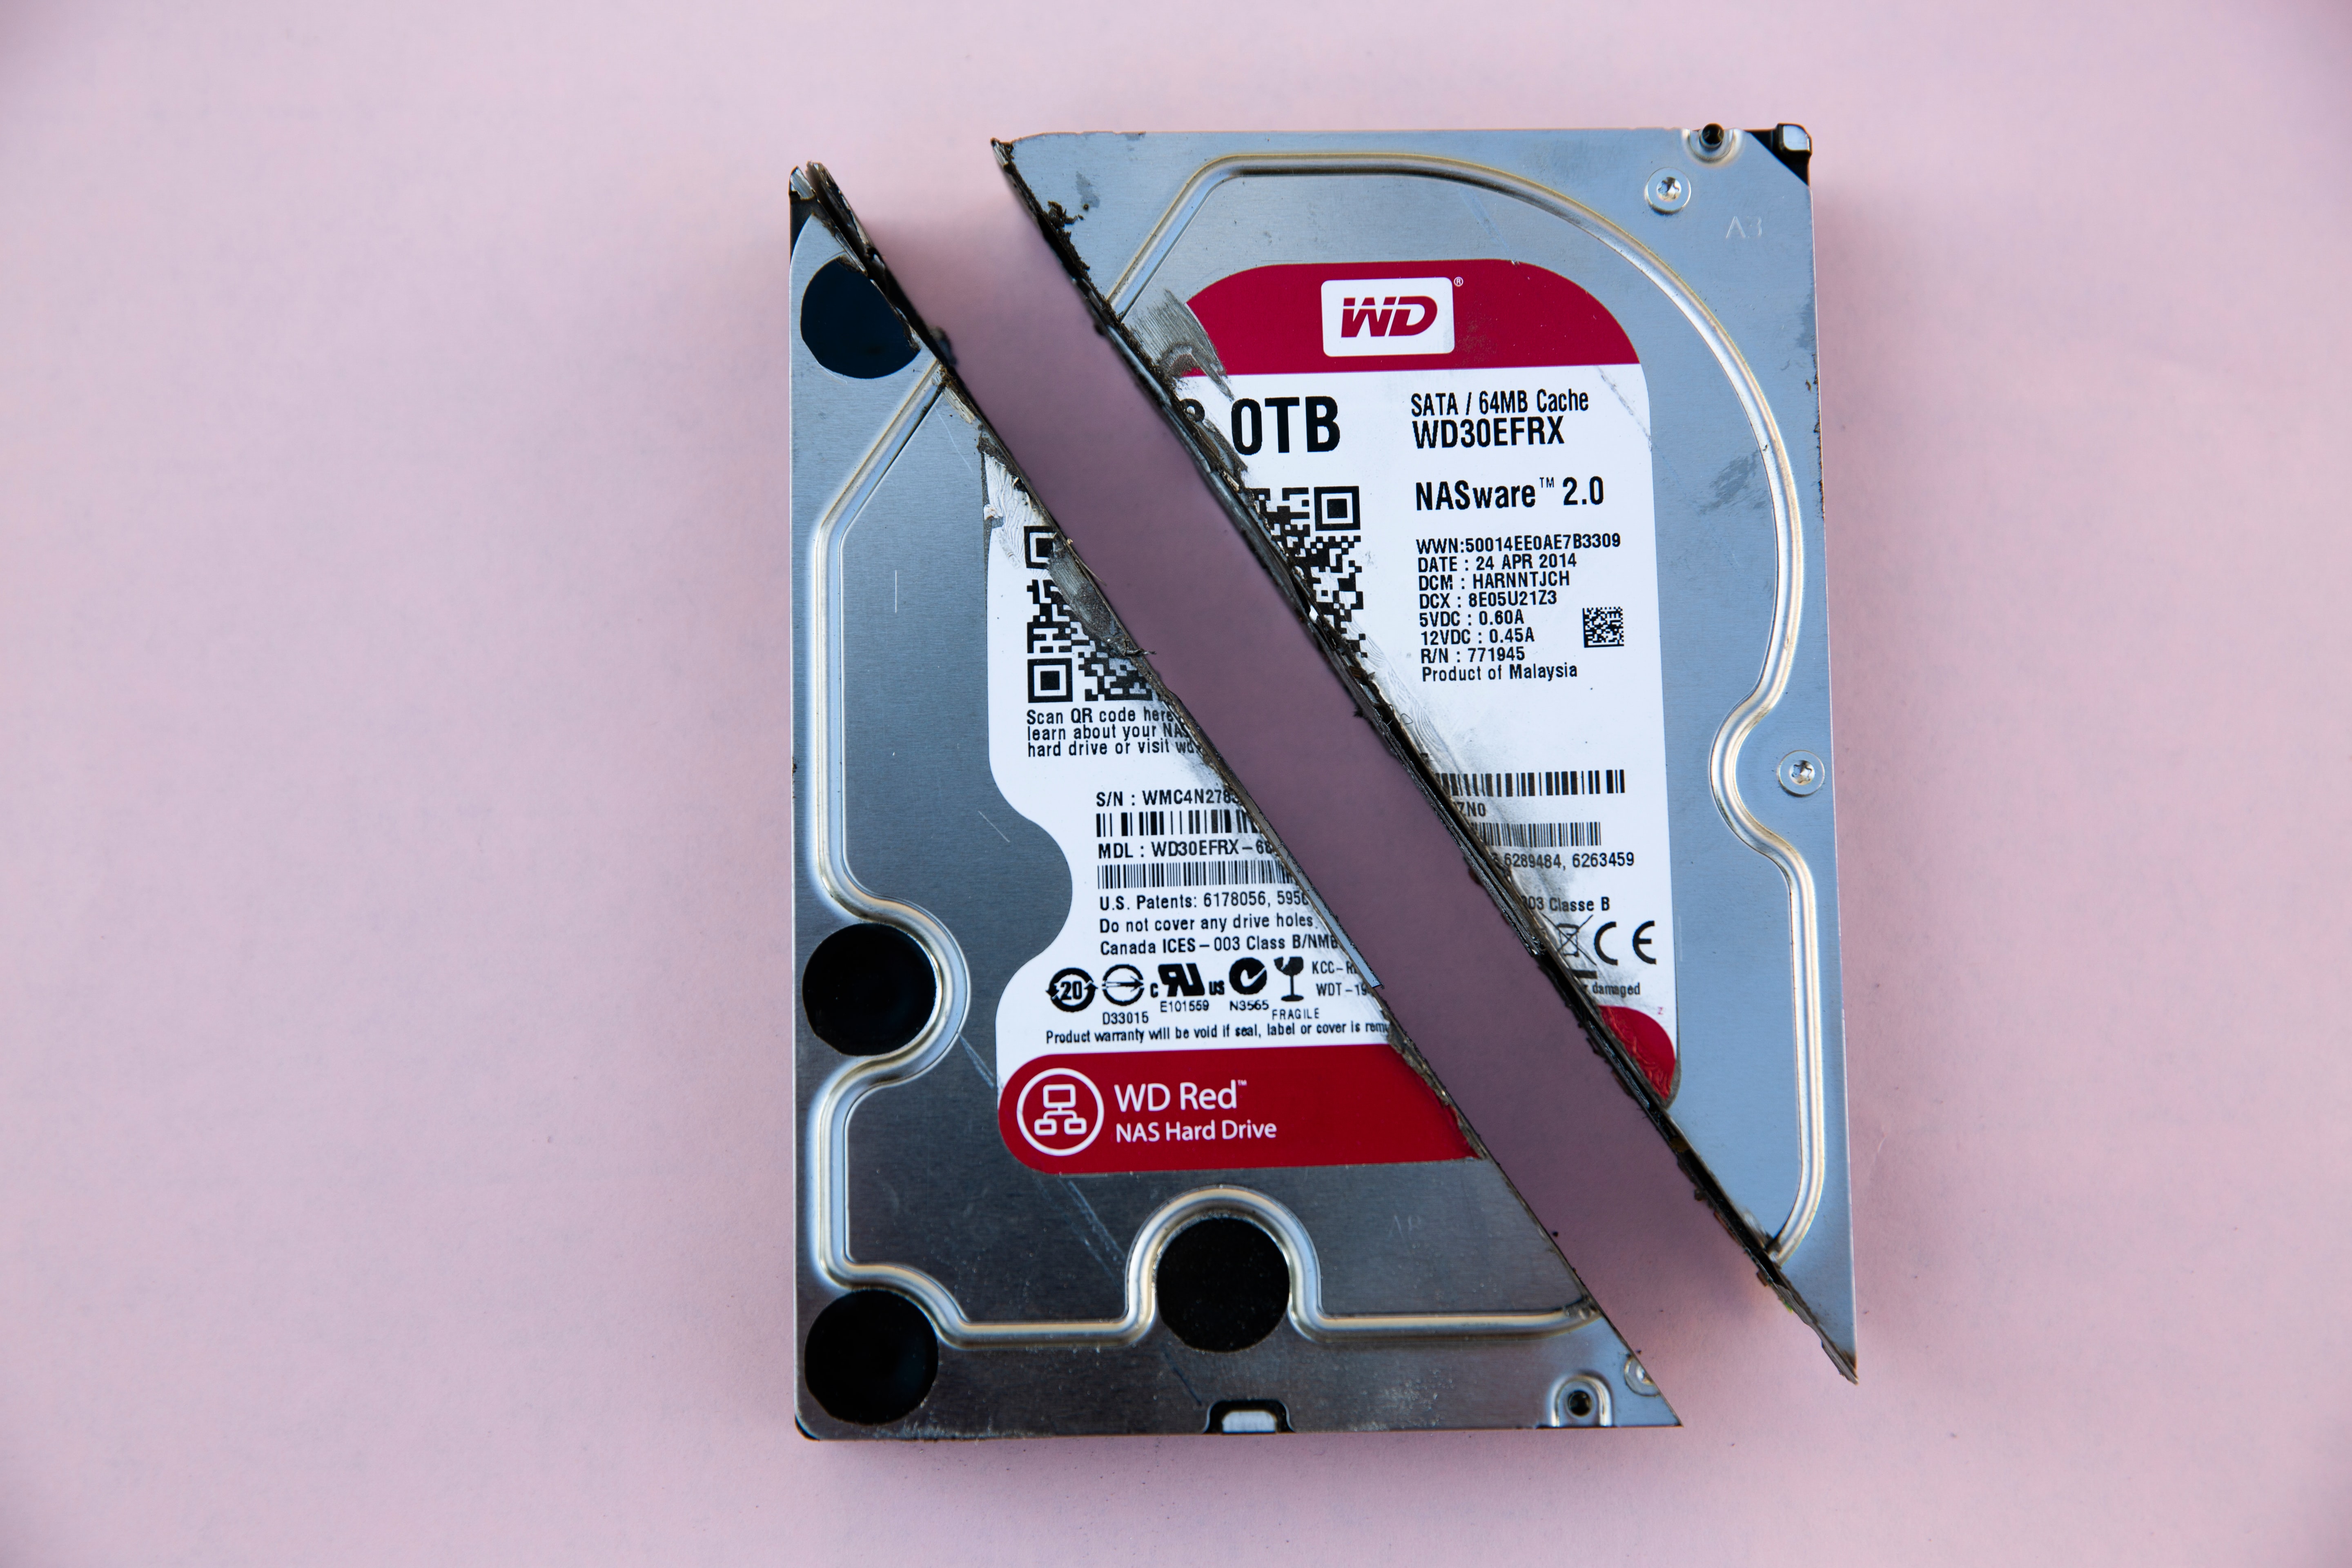 A WD Red harddrive cut in half on a pink background